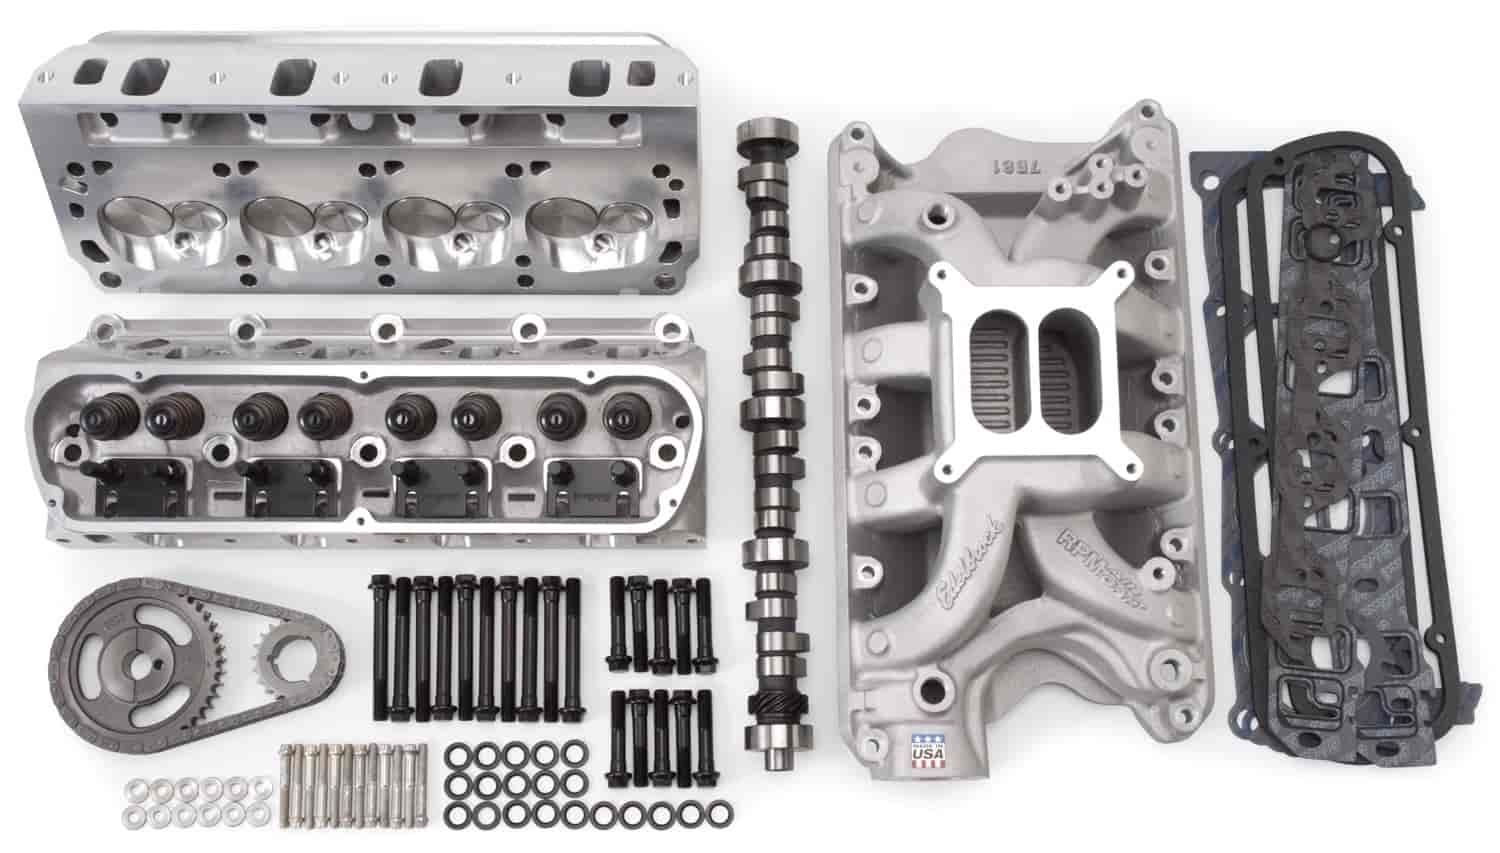 RPM Power Package Top End Kit for E-Boss Small Block Ford 302 with Cleveland Heads